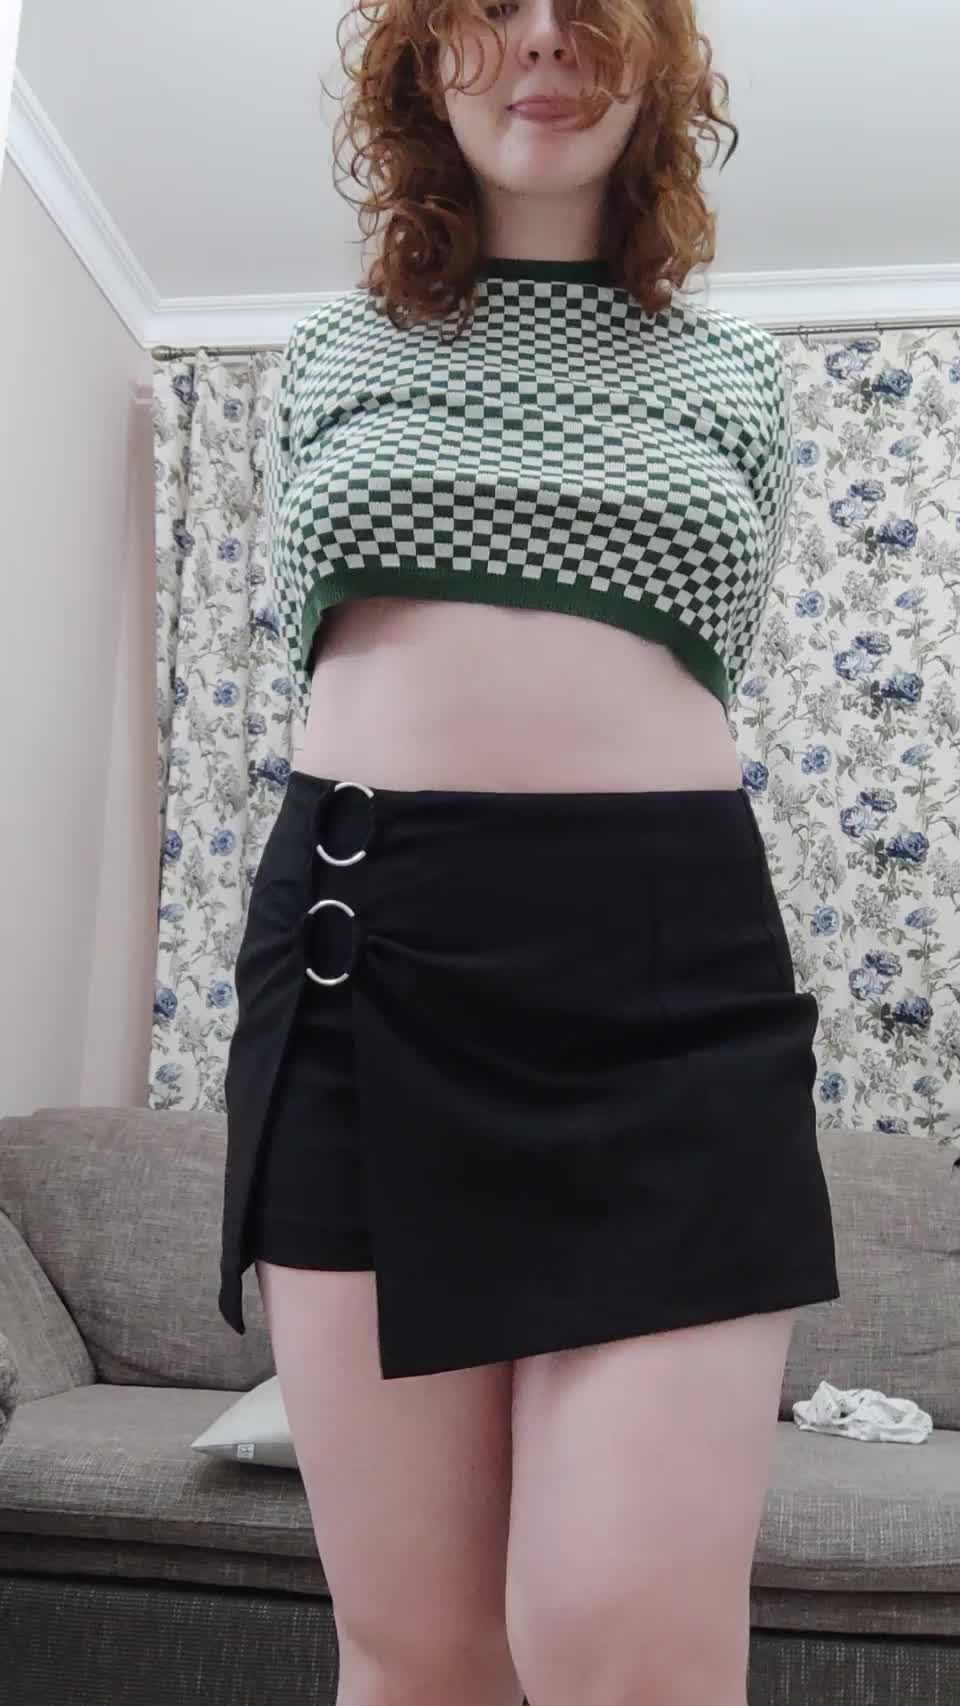 What's under the skirt? : video clip